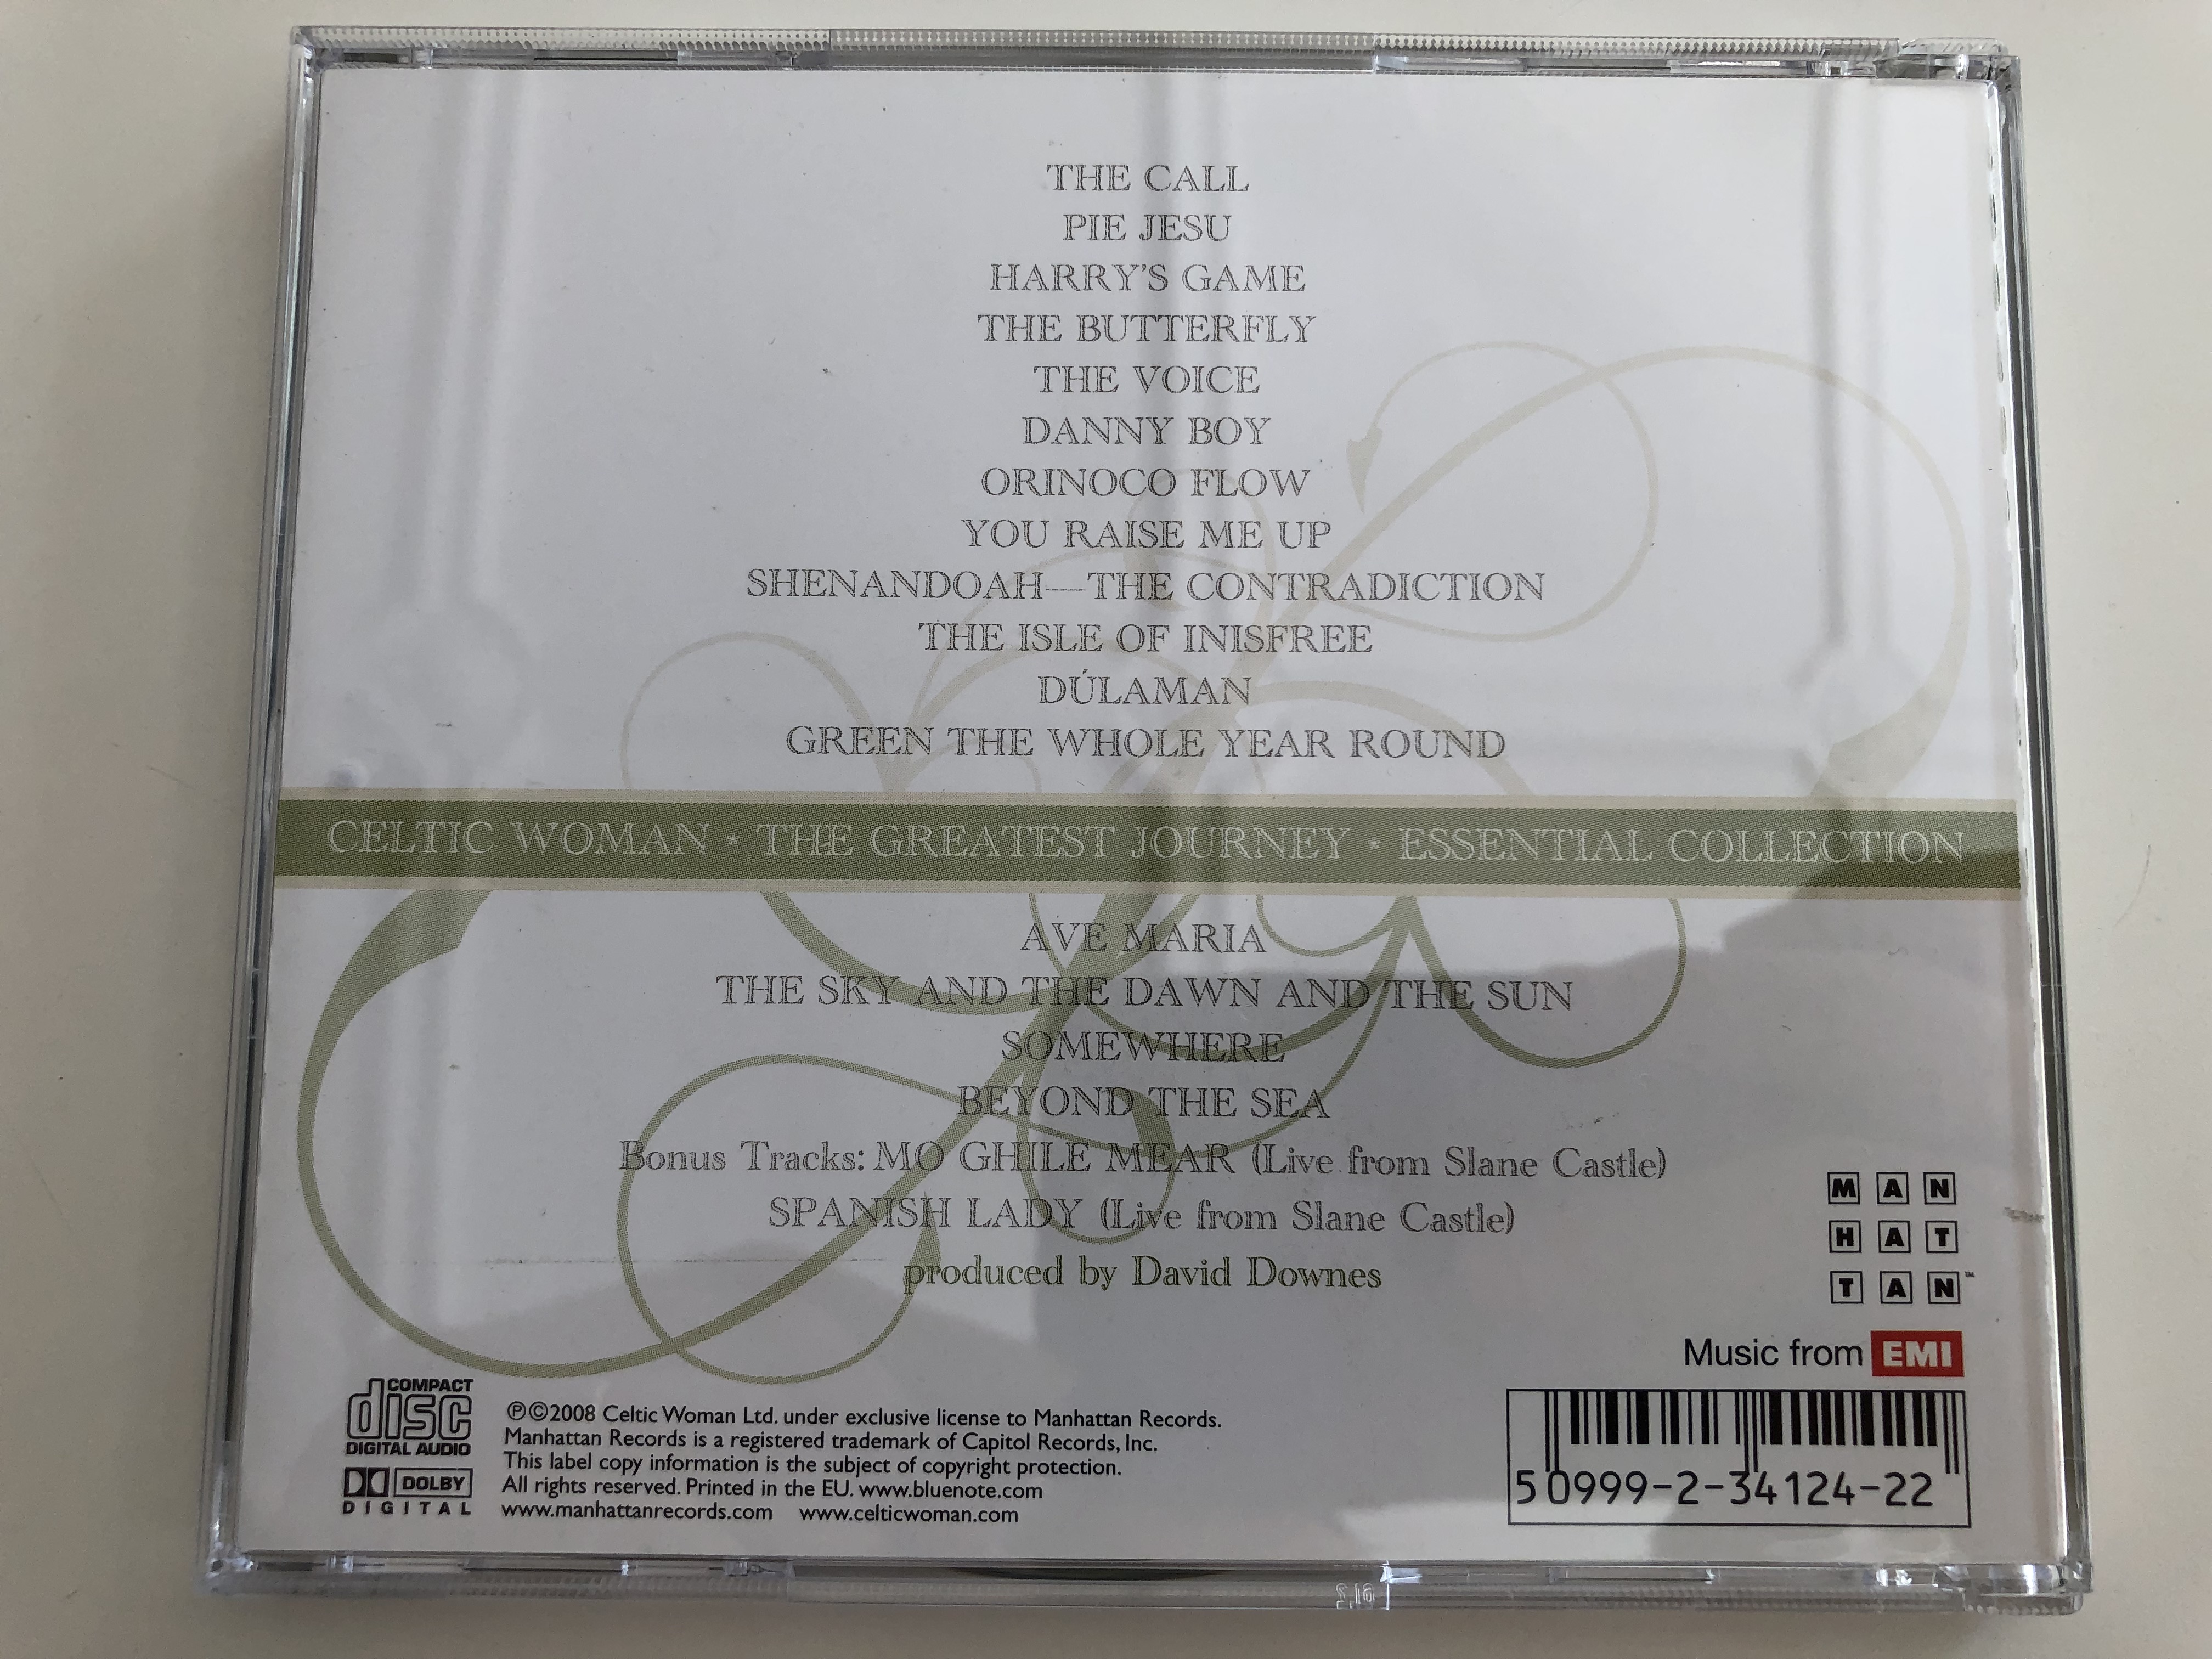 celtic-woman-the-greatest-journey-essential-collection-emi-audio-cd-2008-8-.jpg